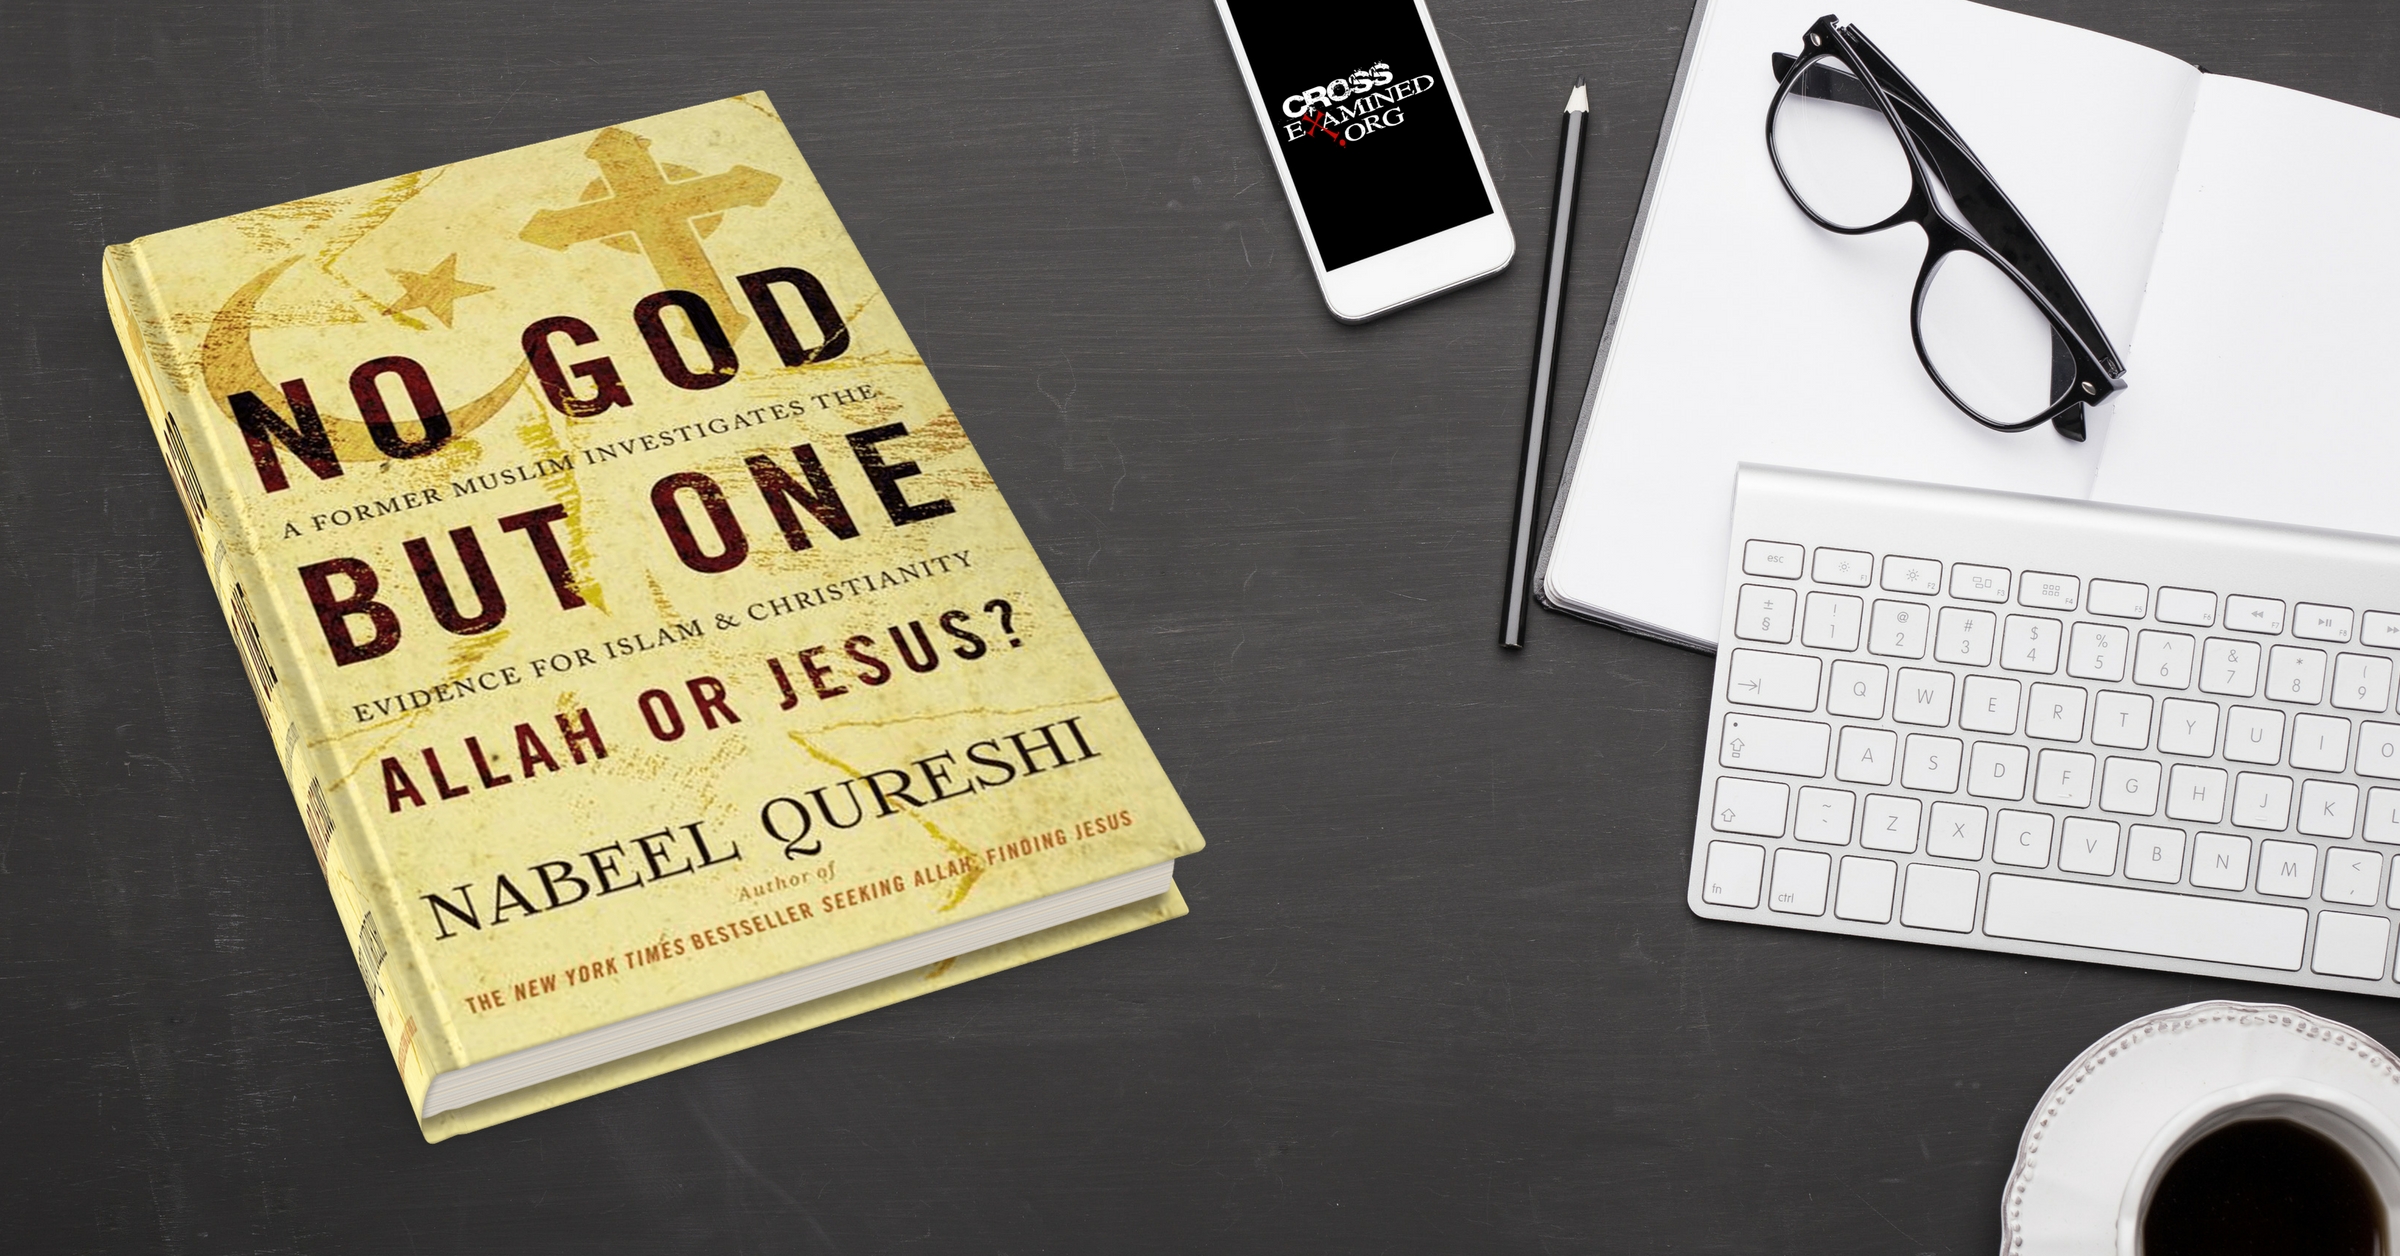 Book Review: No God But One: Allah or Jesus? by Nabeel Qureshi